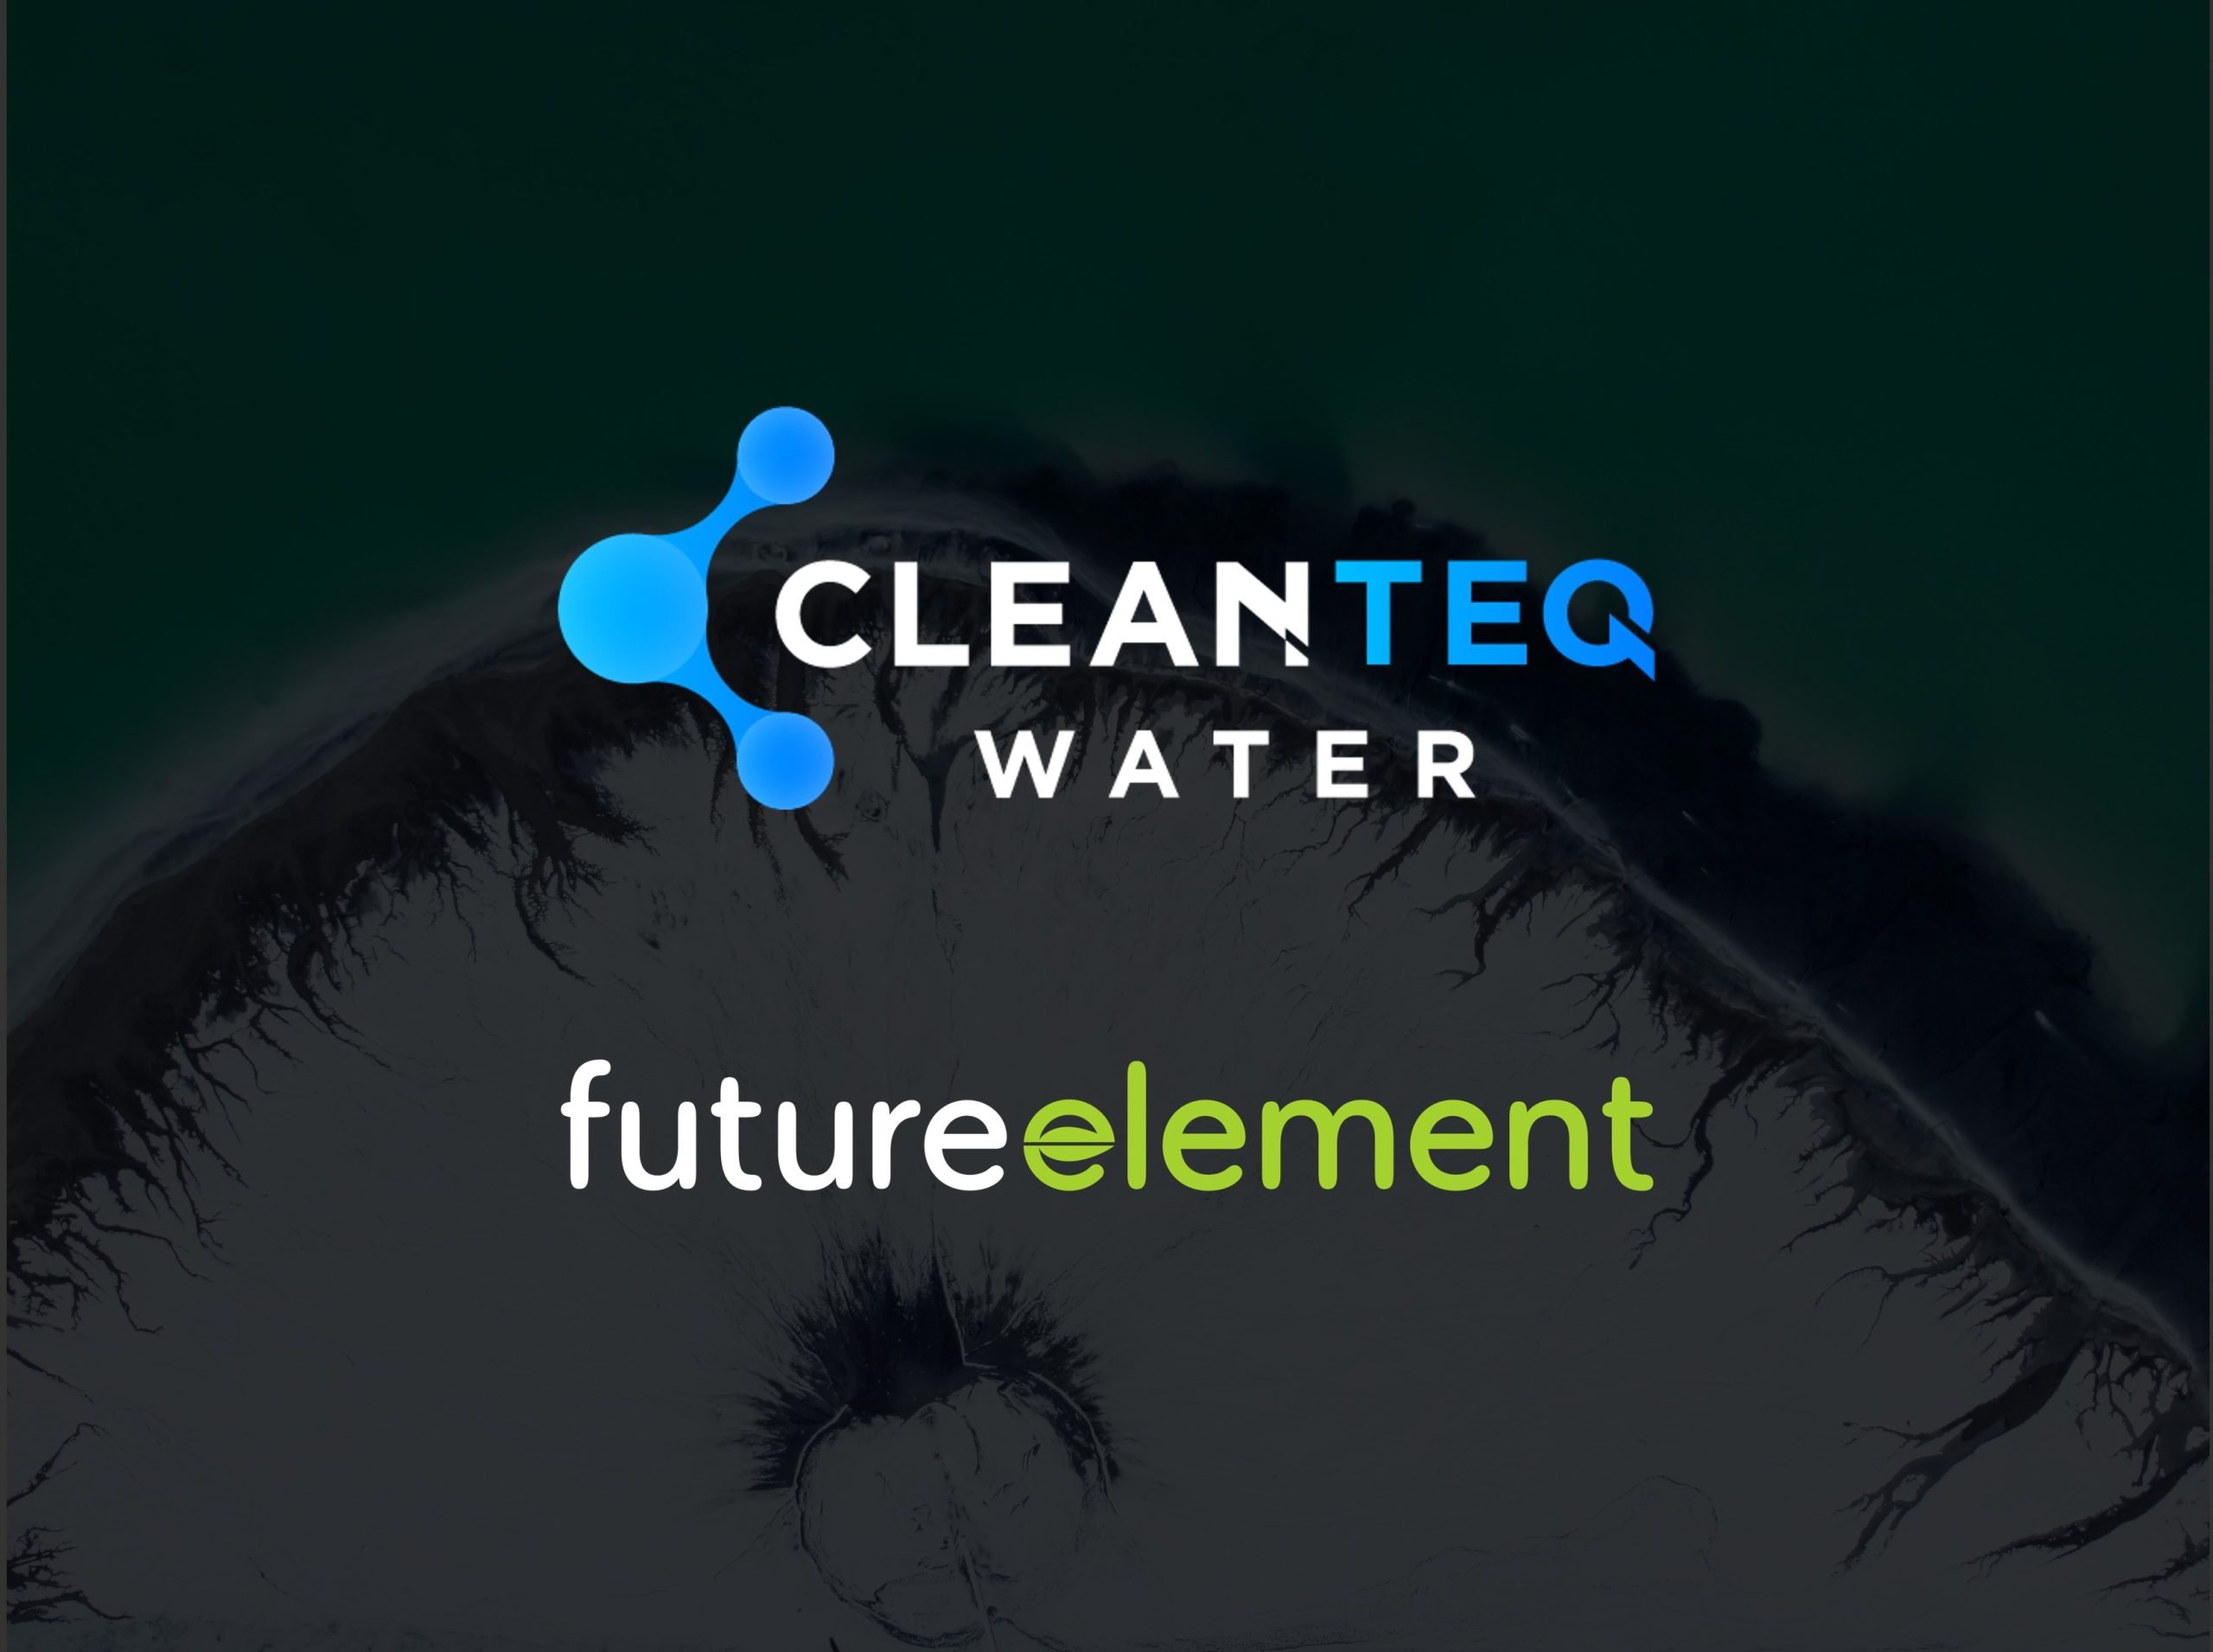 Future Element JV to Perform Tailings Dewatering Studies using ATA® Technology for BHP